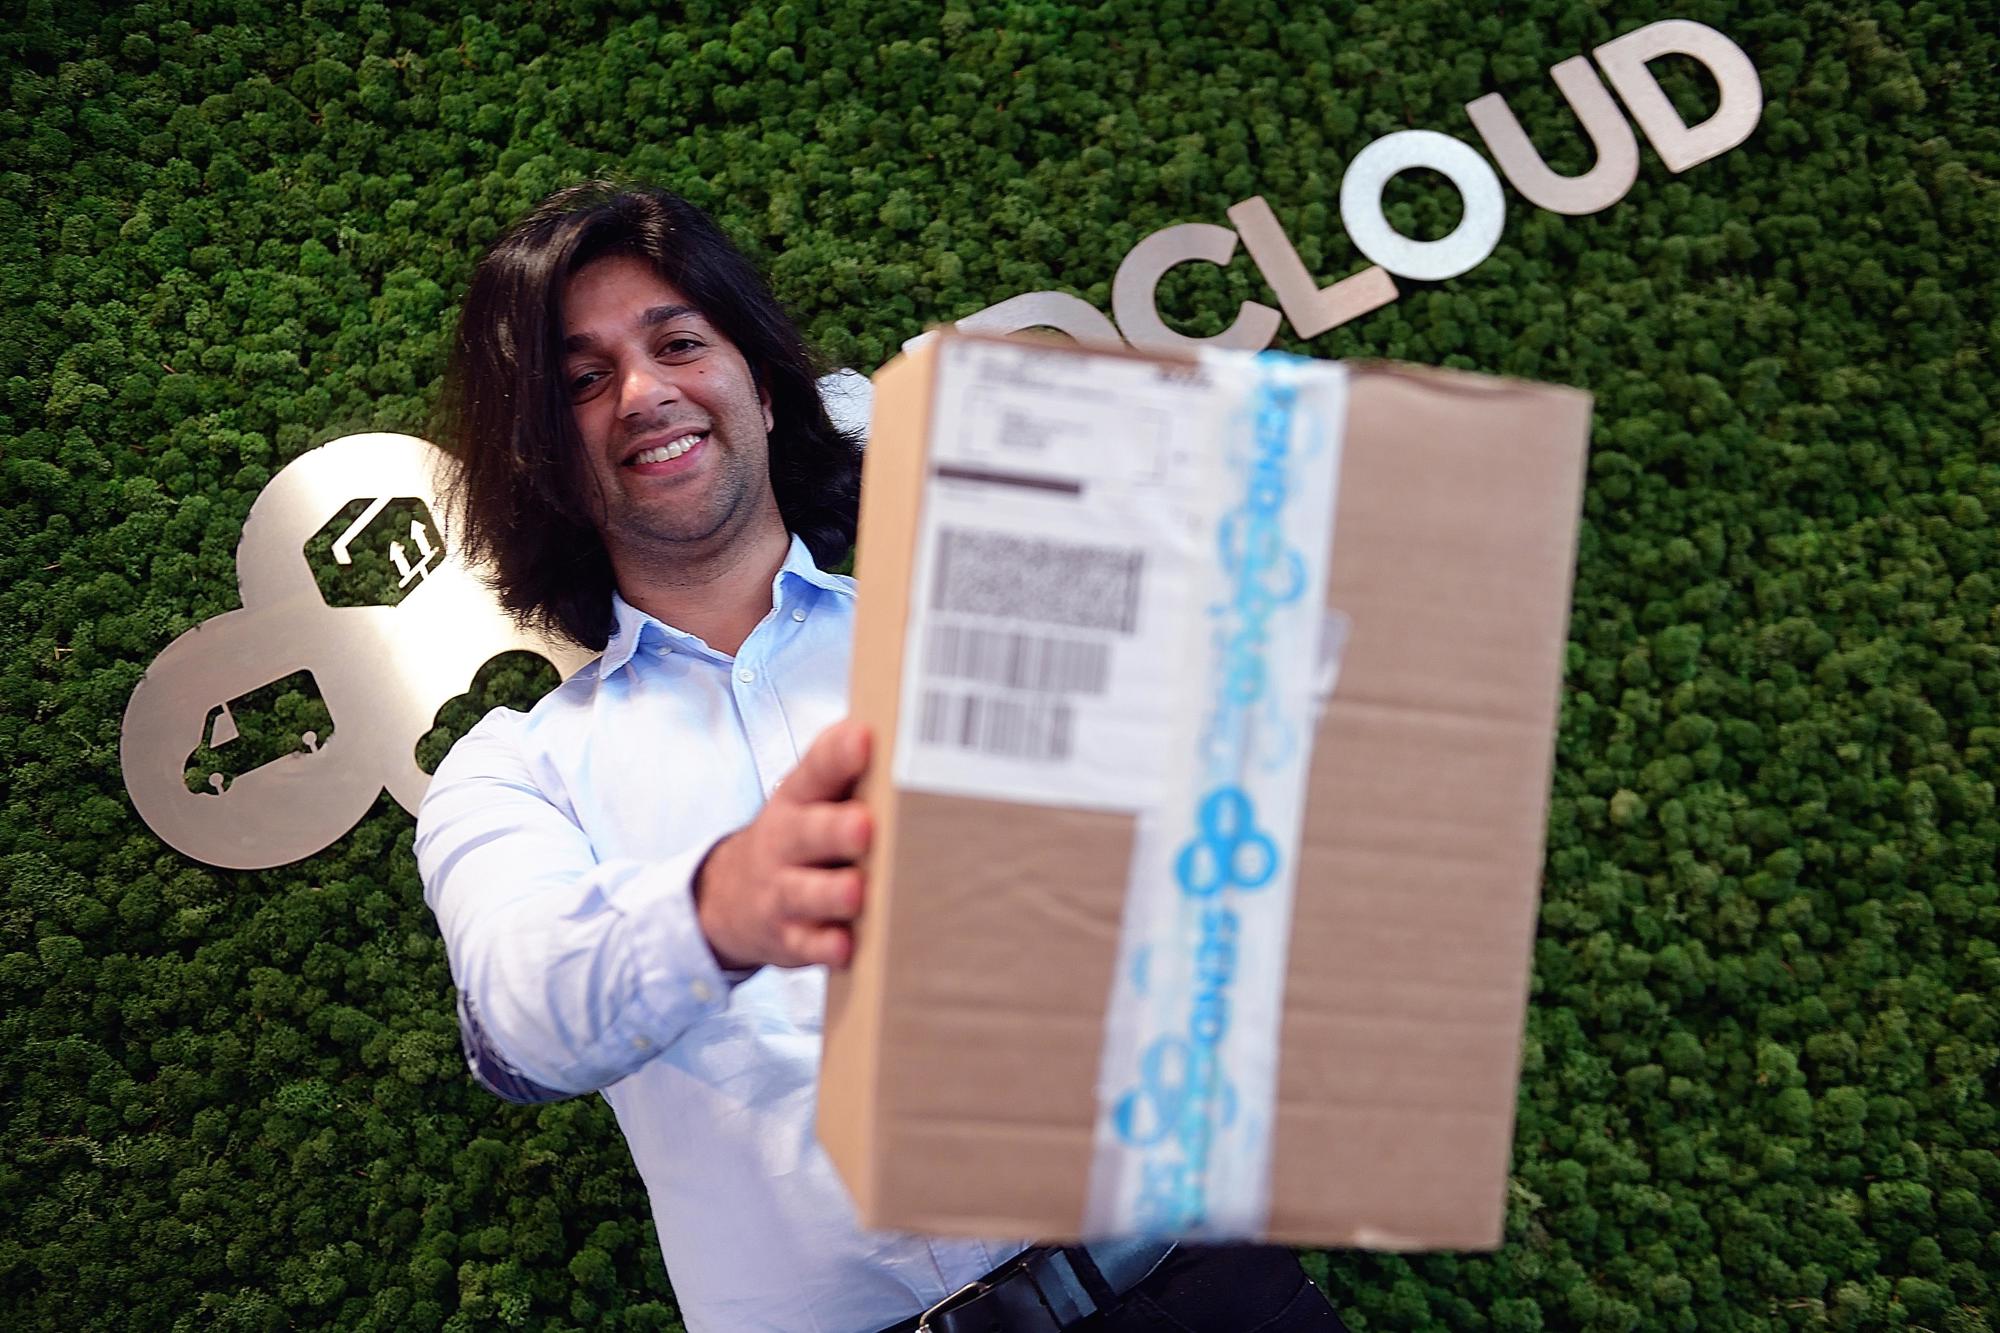 Eindhoven-based SendCloud is one of the fastest growing tech companies in the Netherlands